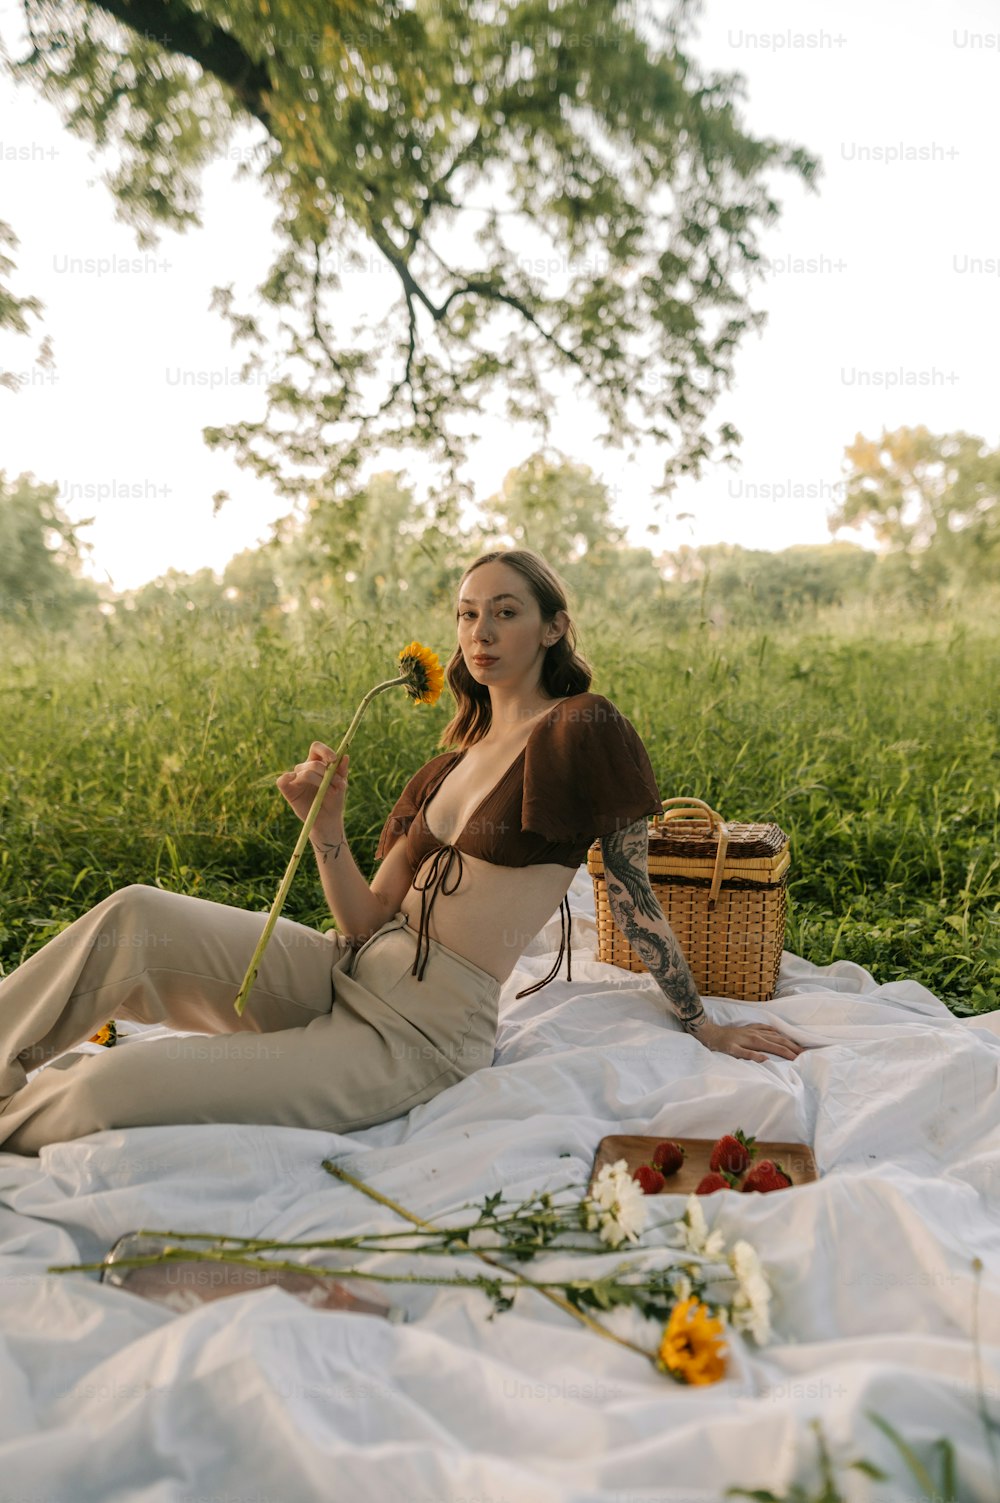 a woman sitting on a blanket holding a flower